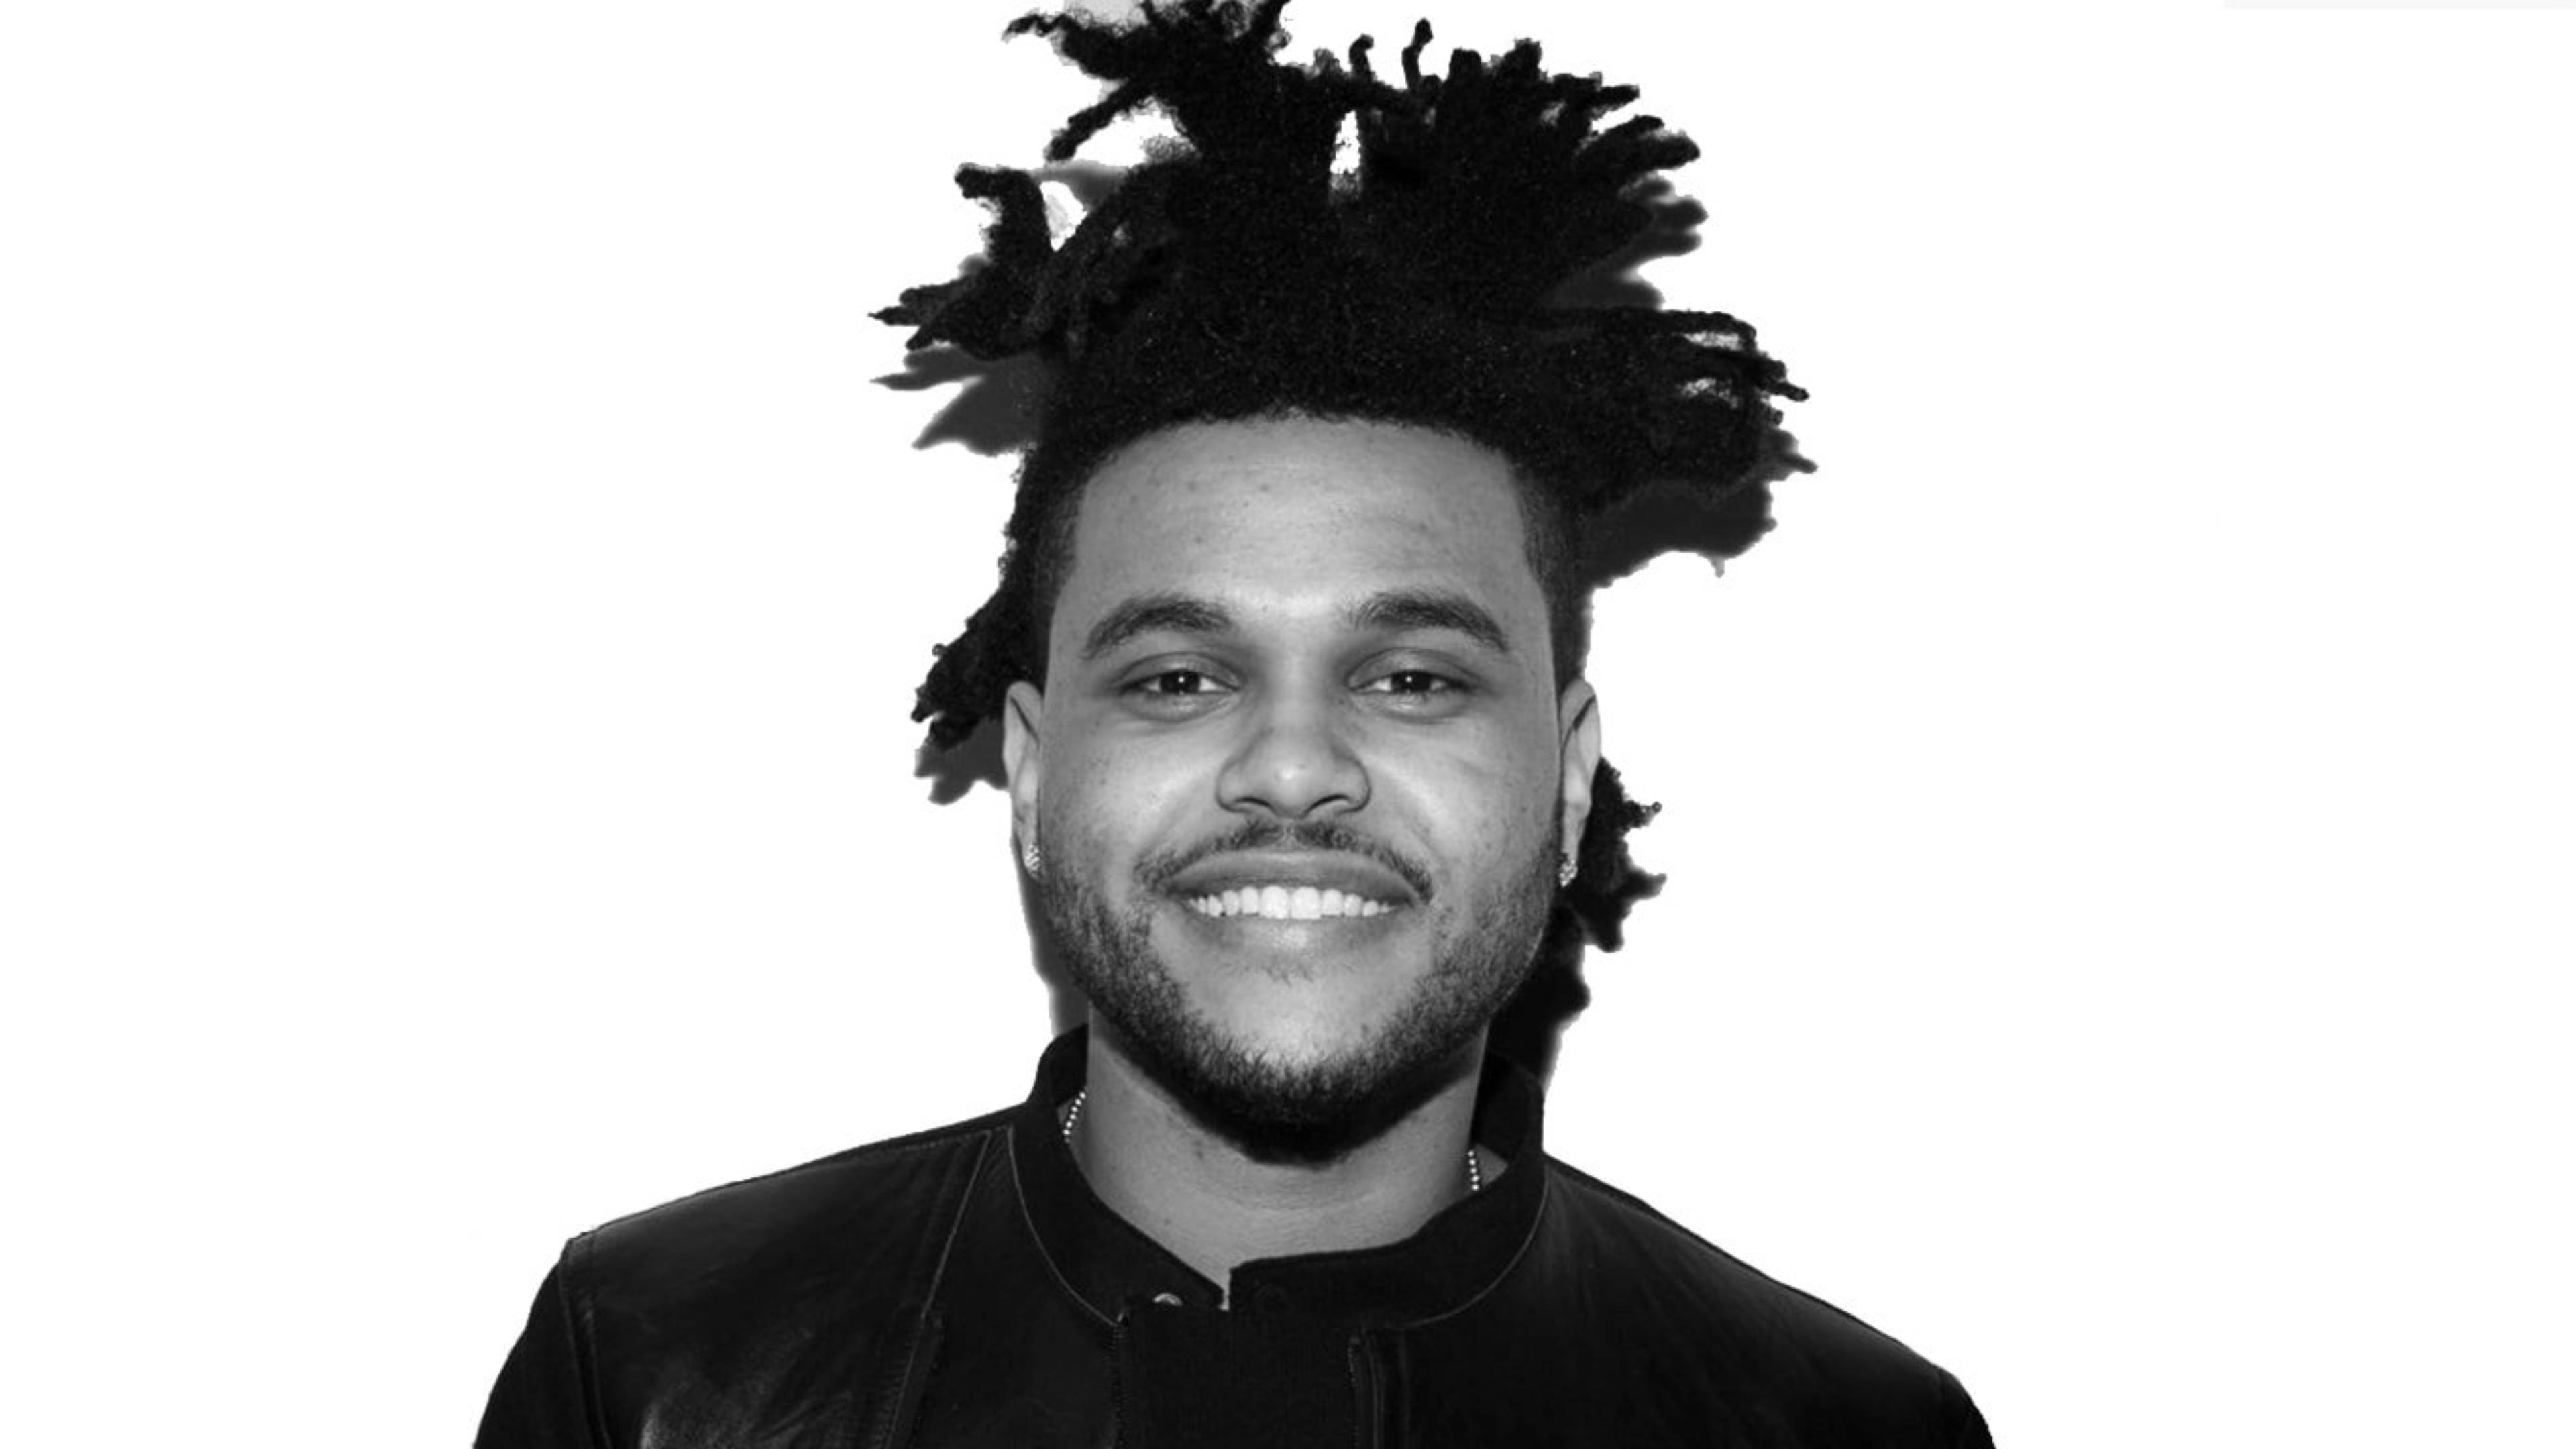 Come through the weeknd